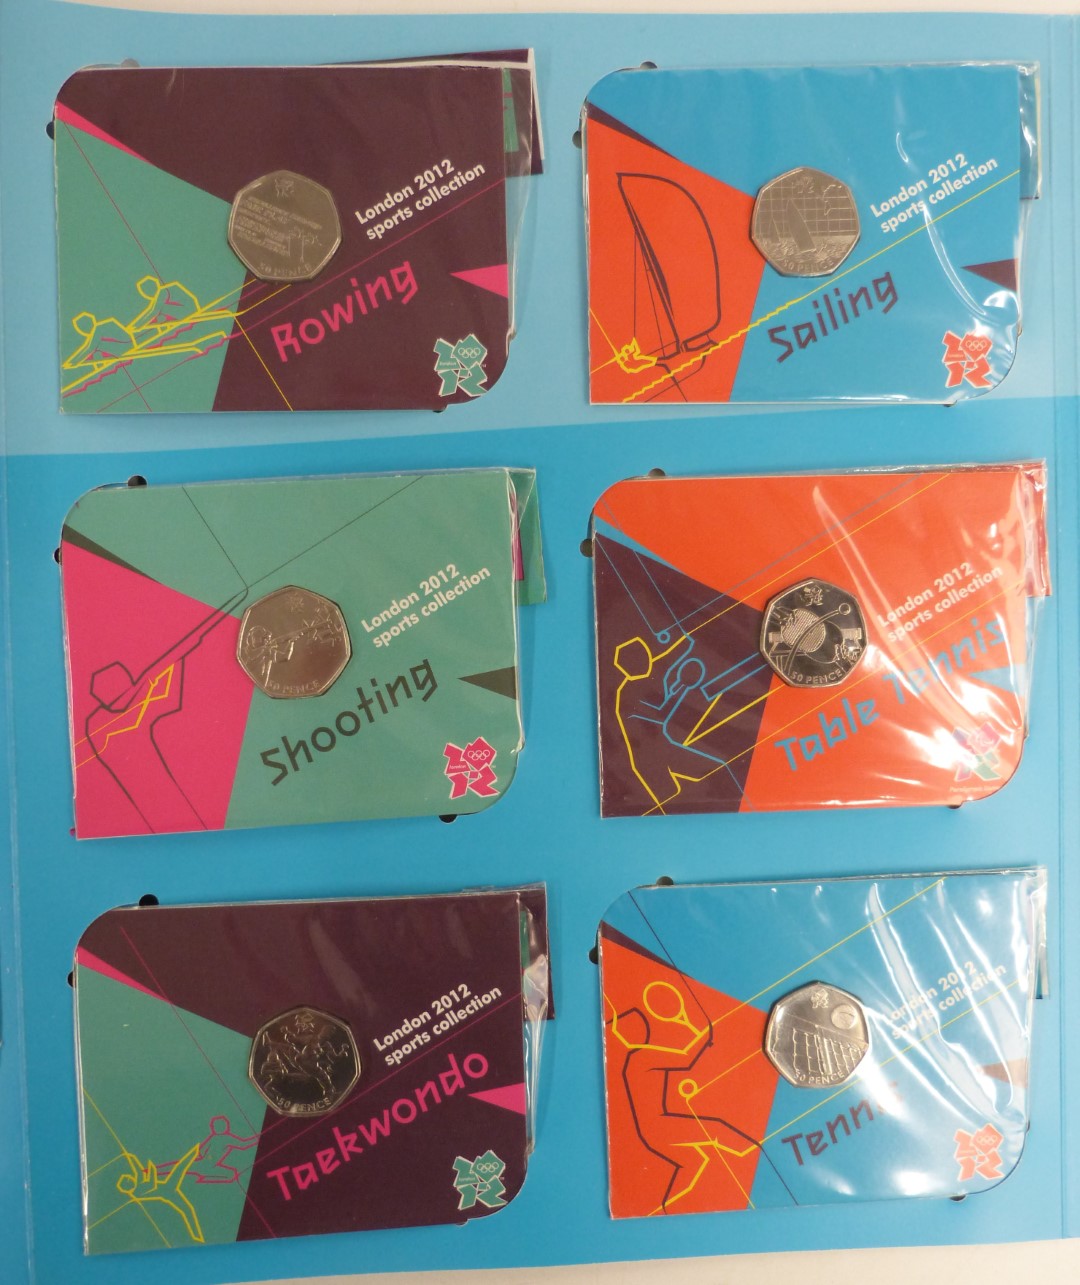 2012 London Olympic Games 50p collector's album with set of 29 coins and completion medallion - Image 4 of 5